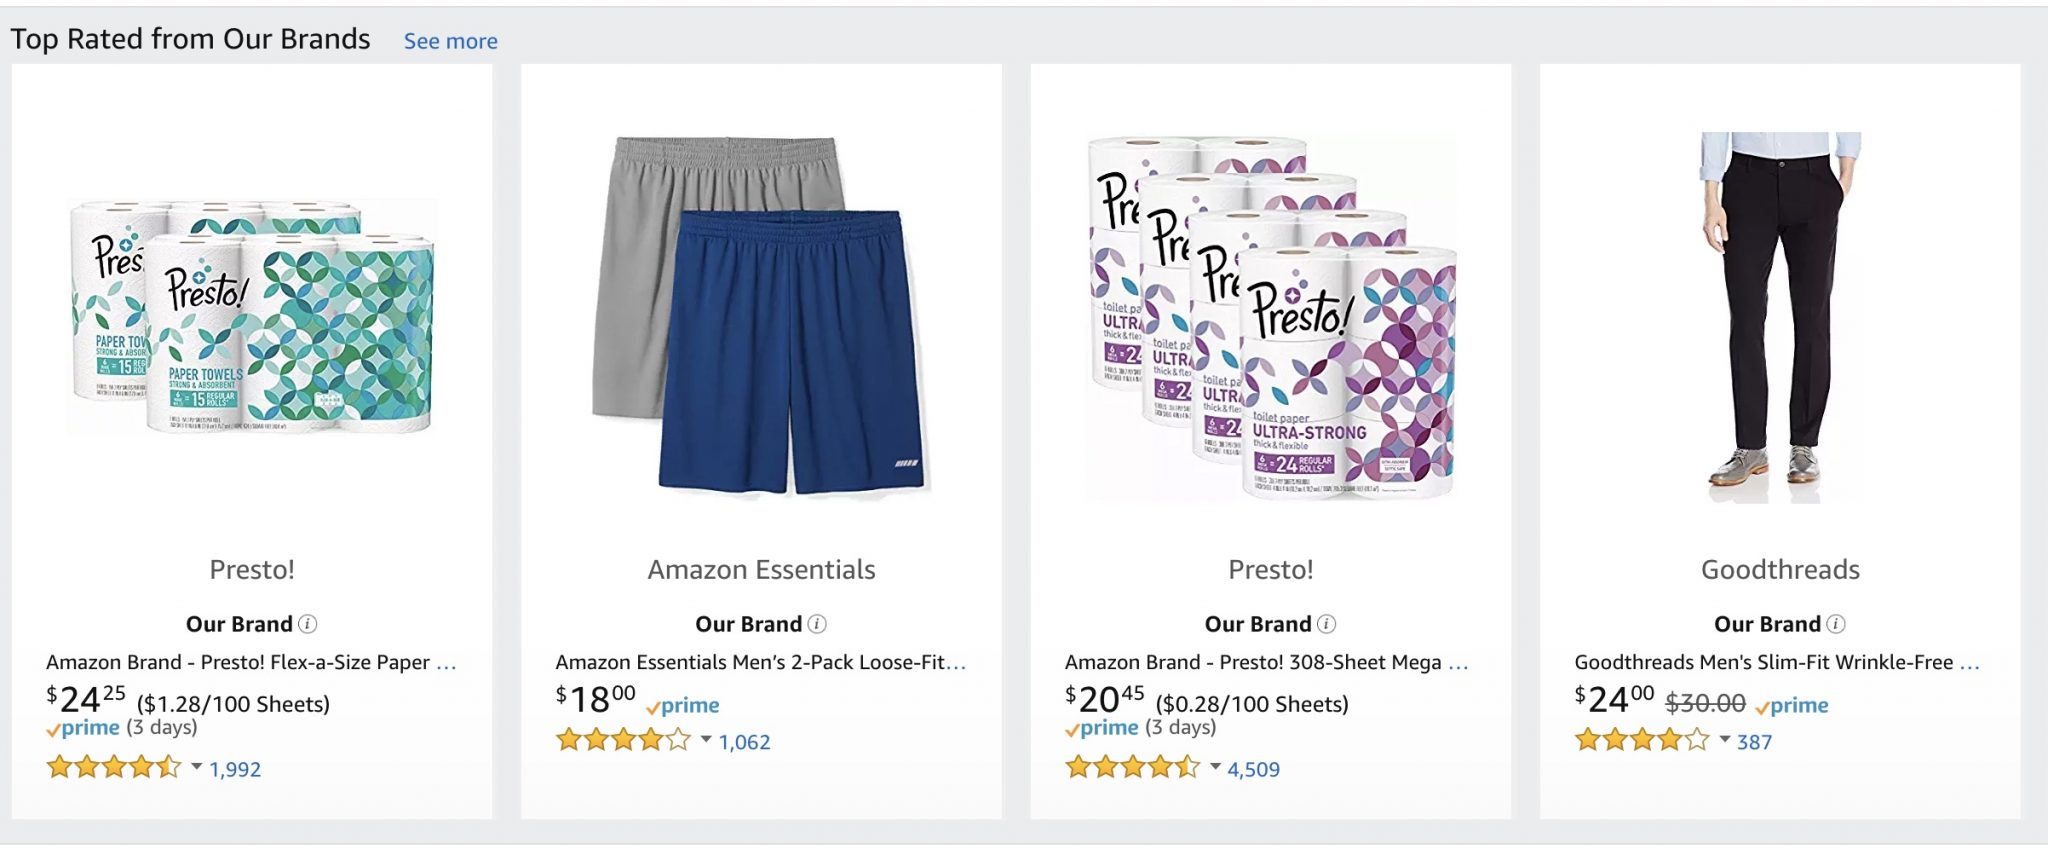 Presto! paper towels and Amazon Essentials clothing are among Amazon's "top rated" private labels.